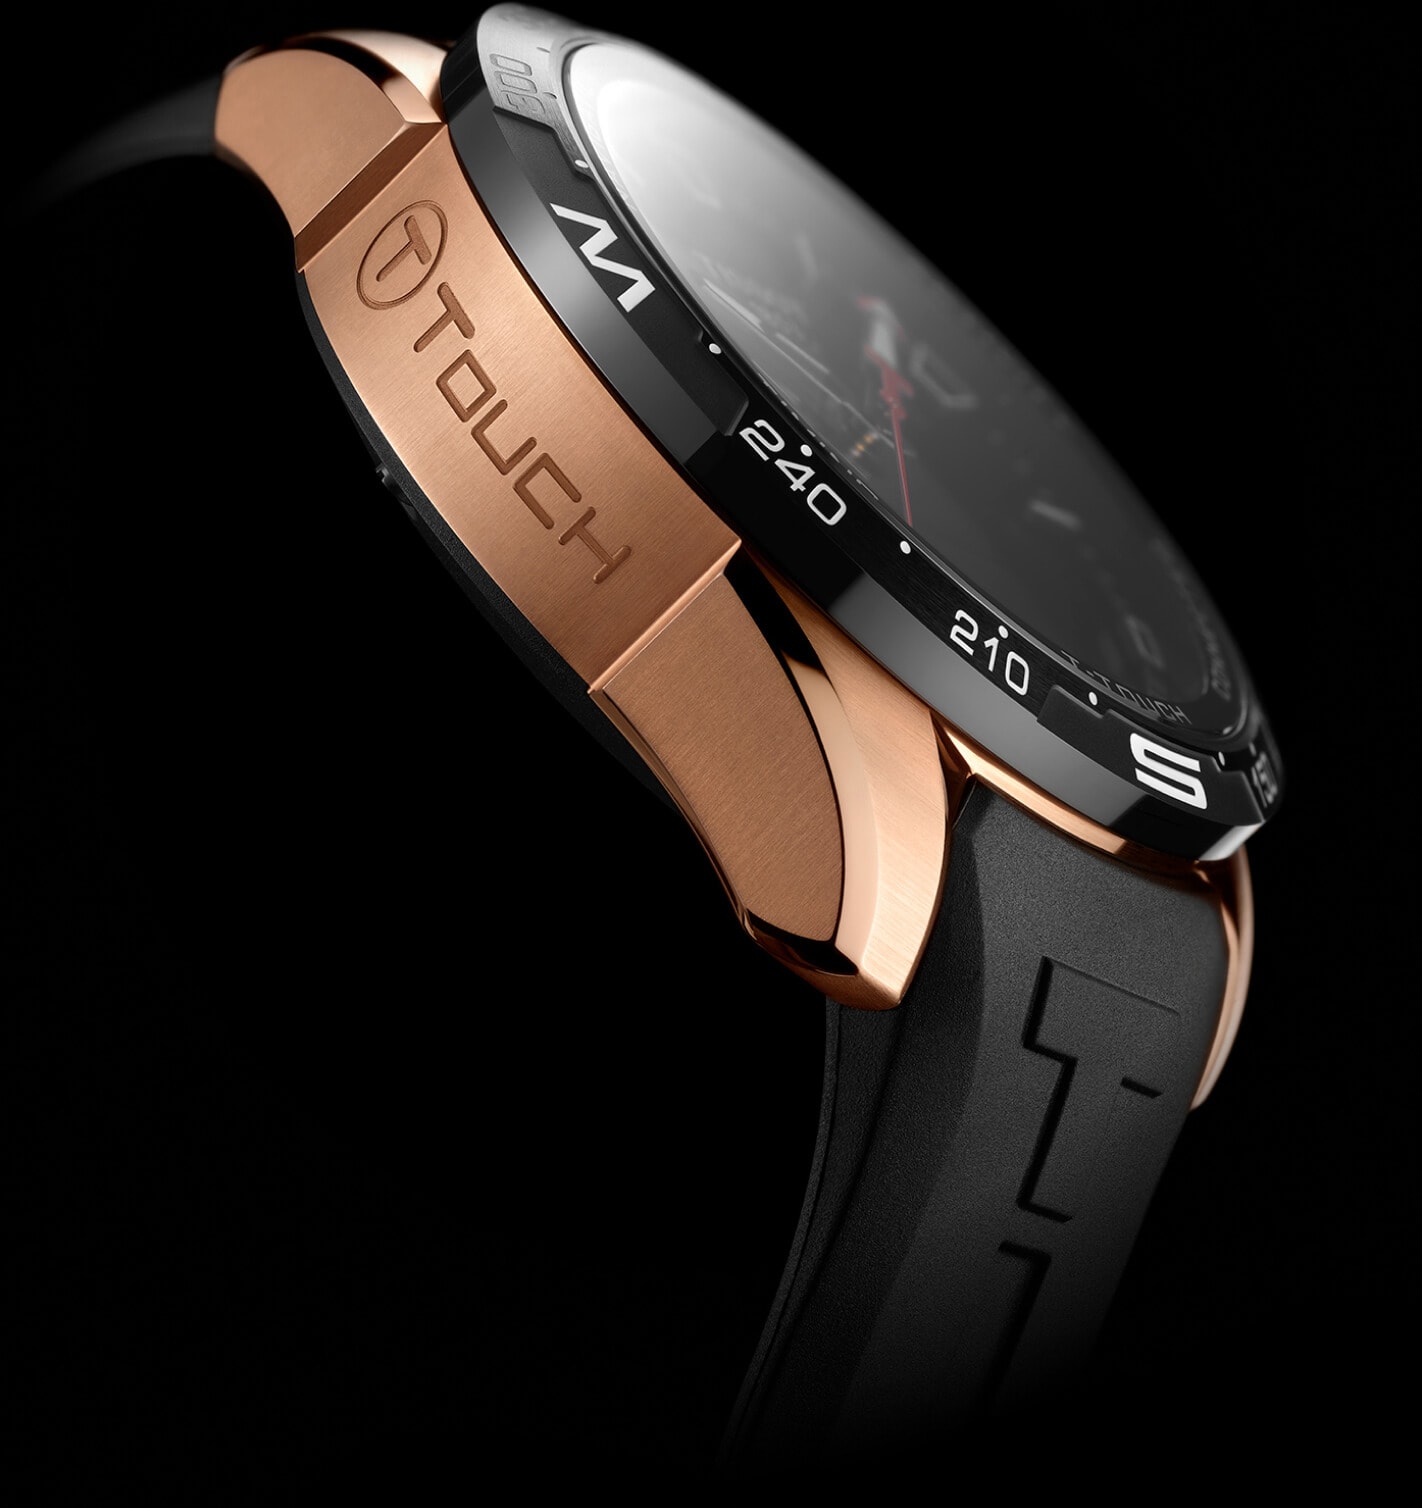 Tissot T-touch connected foremost image